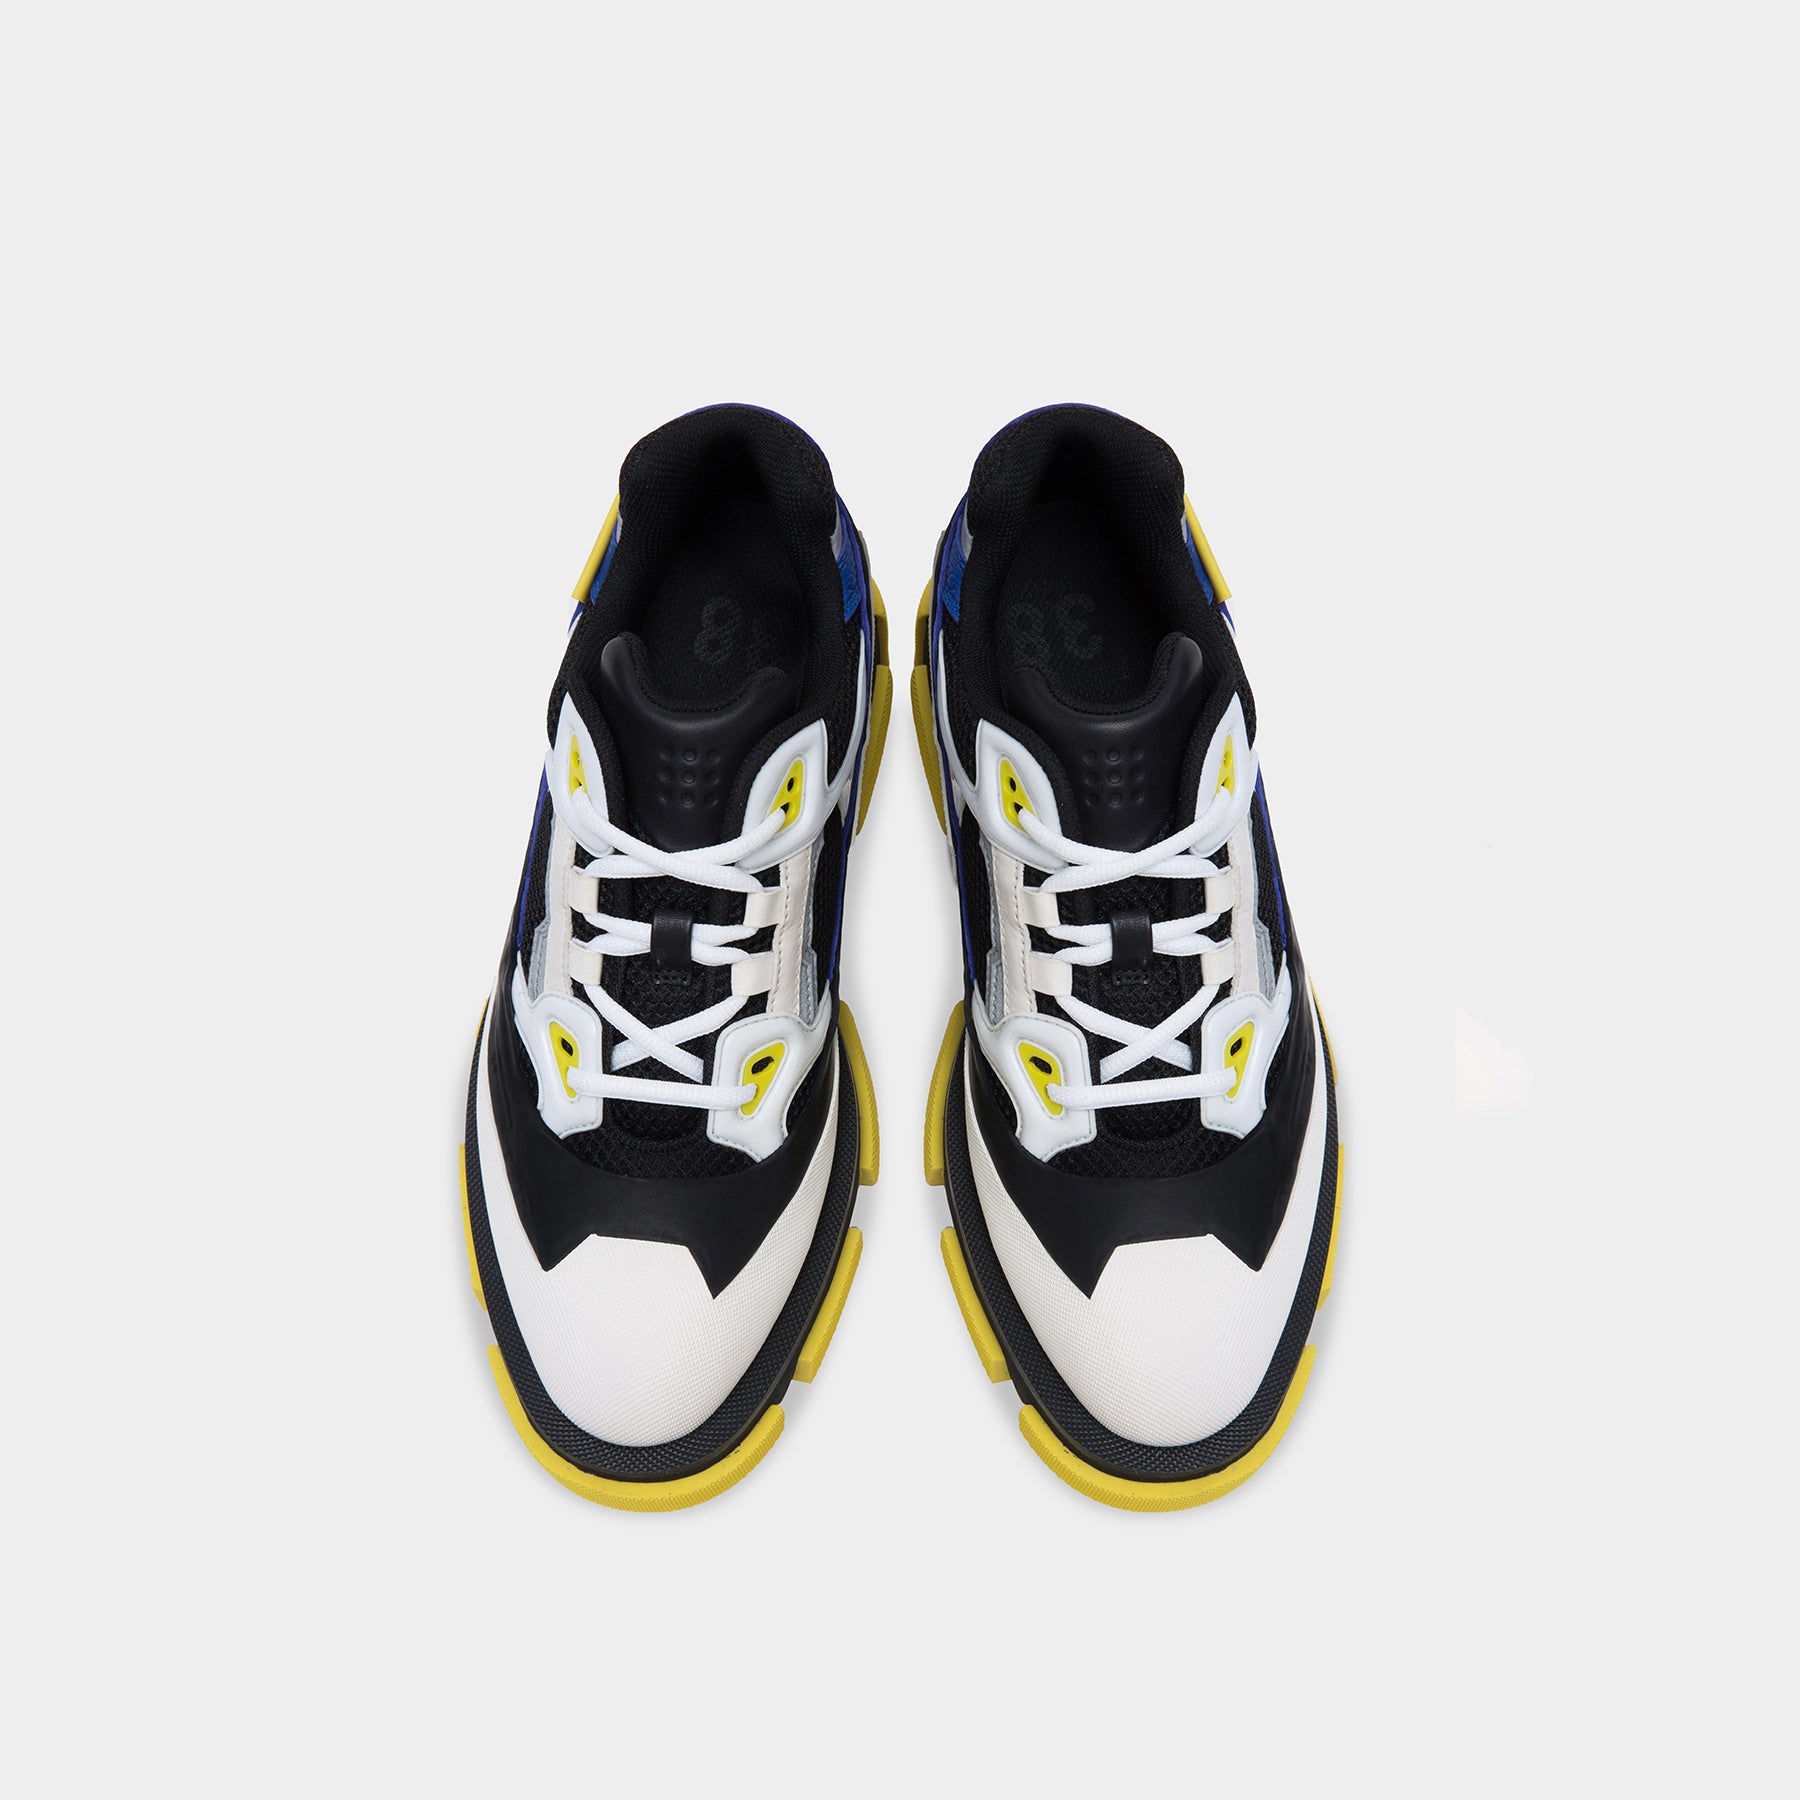 Gao Runner (White/Yellow) Shoes BOTH - NOLM - Clothes Online - nolmau.com - Sydney-Australia Online Shopping